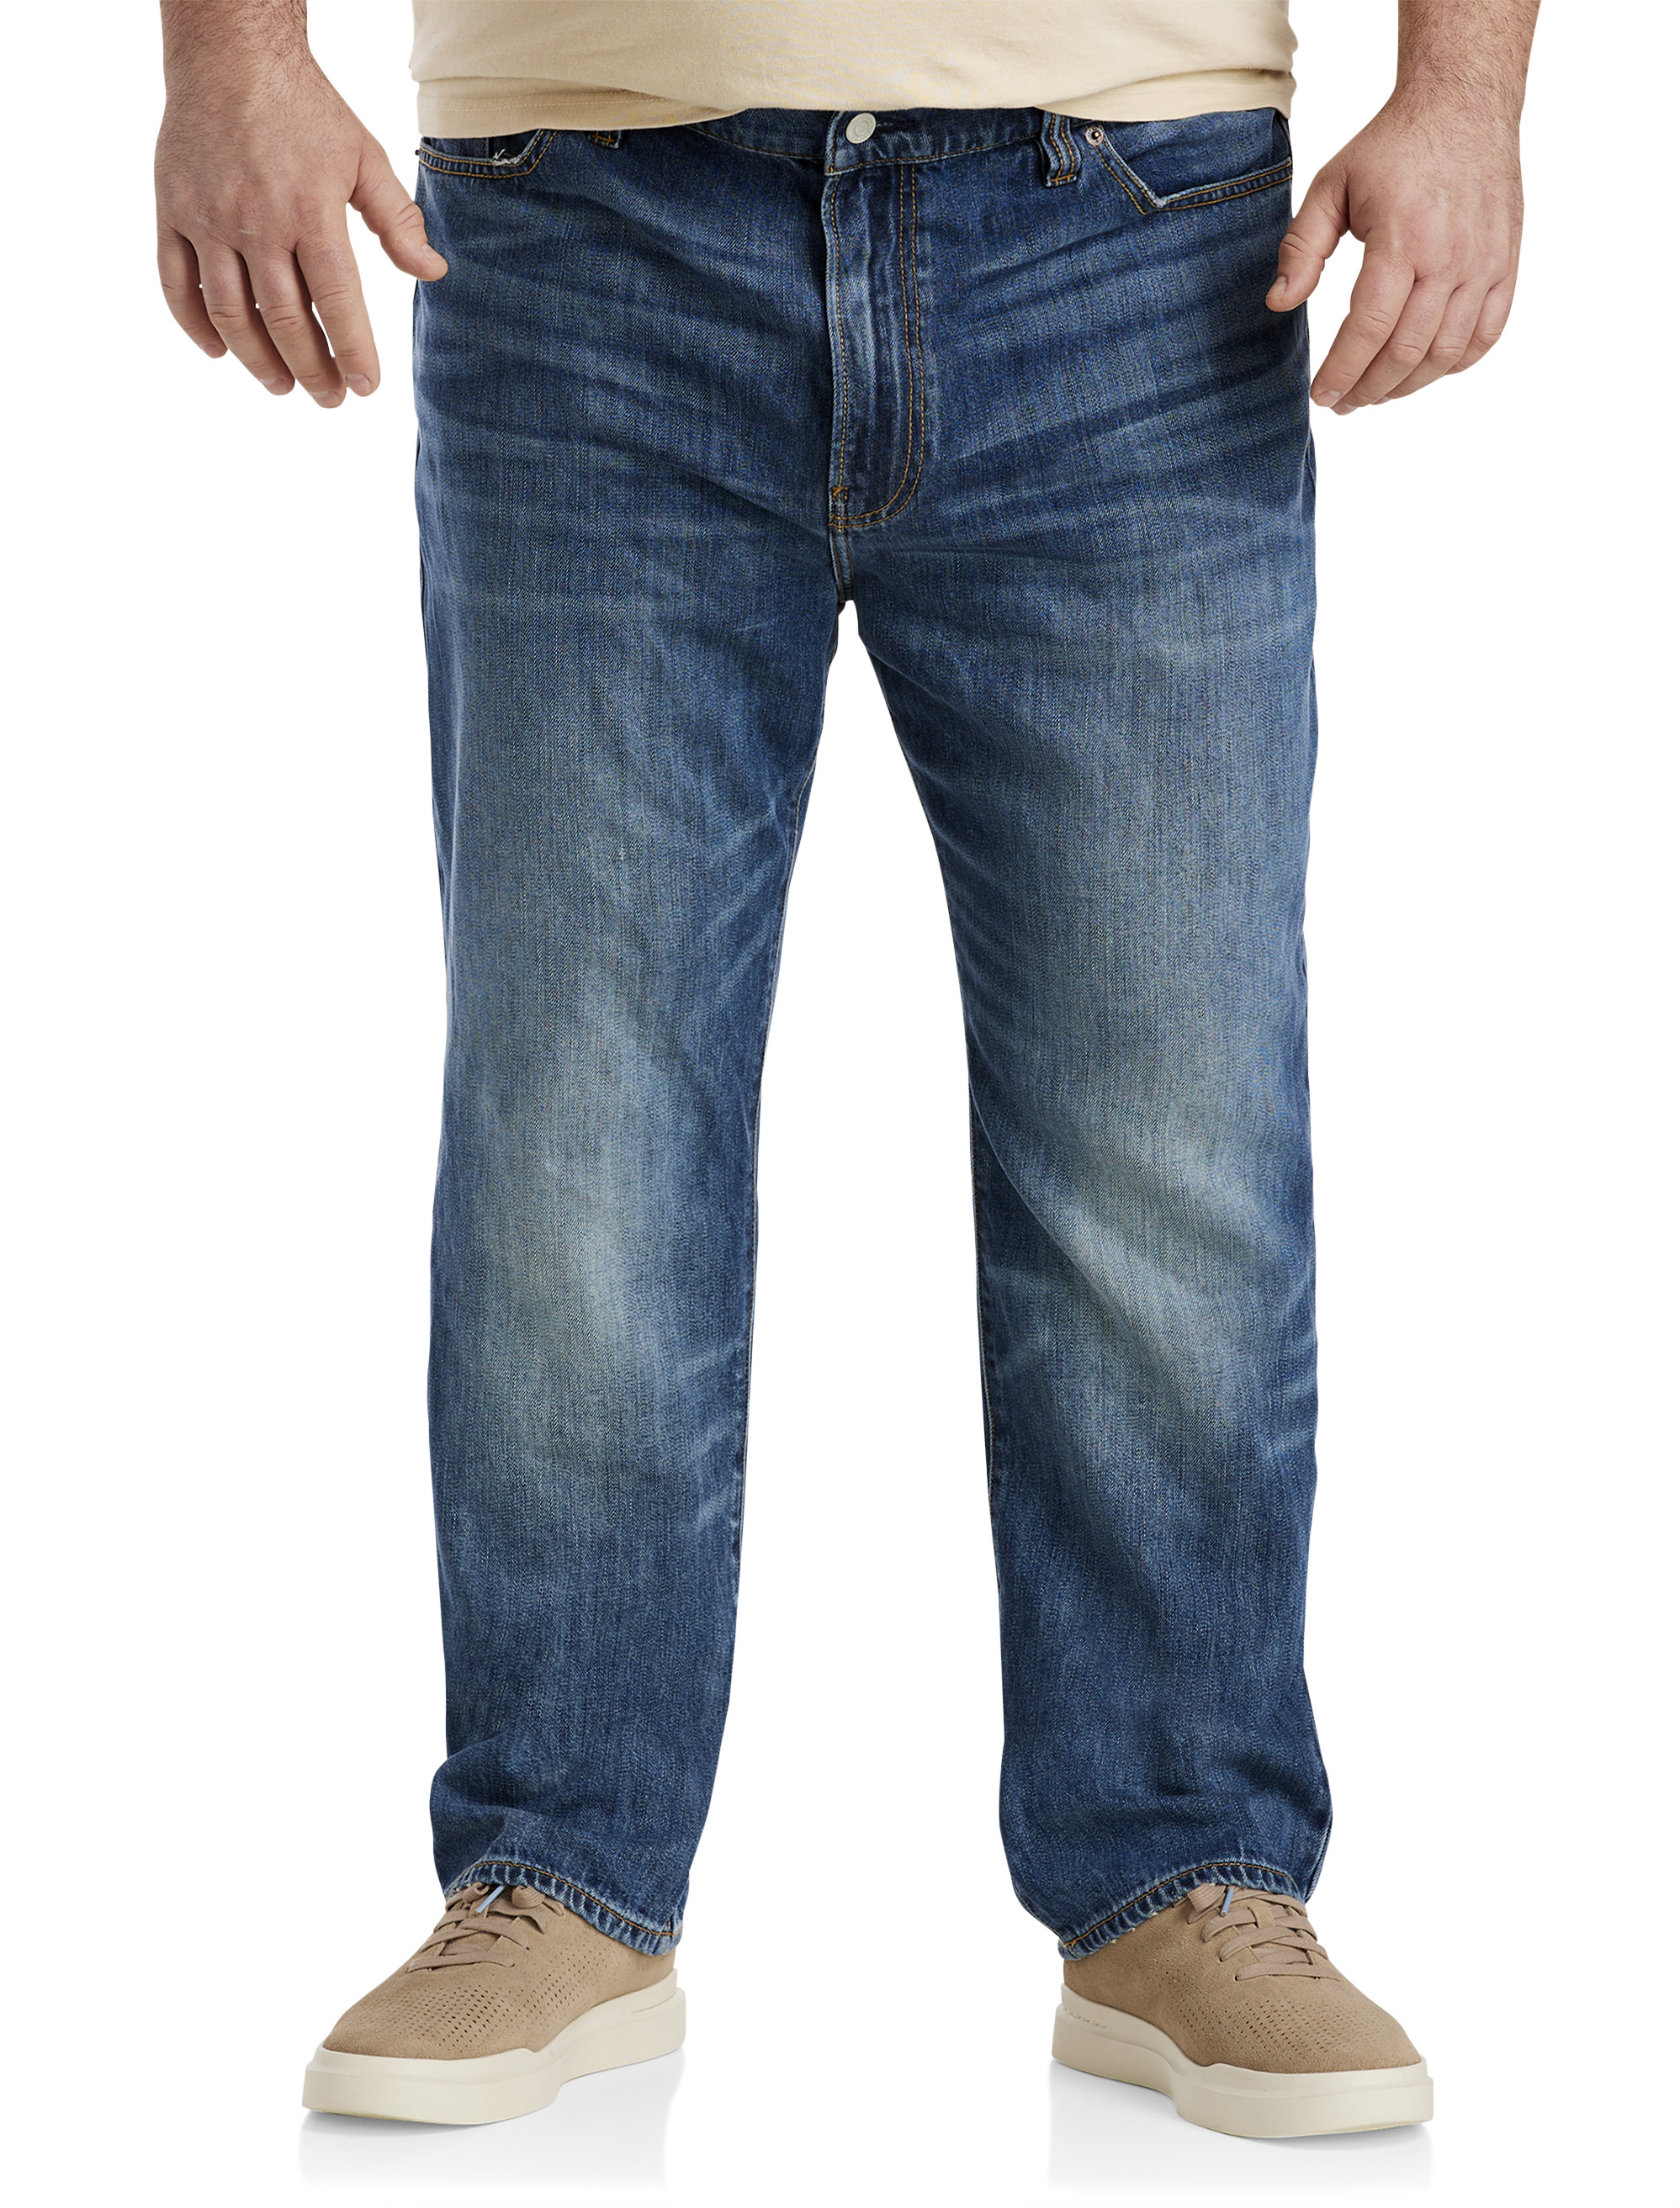 Big + Tall, Lucky Brand Henderson Athletic Fit Jeans